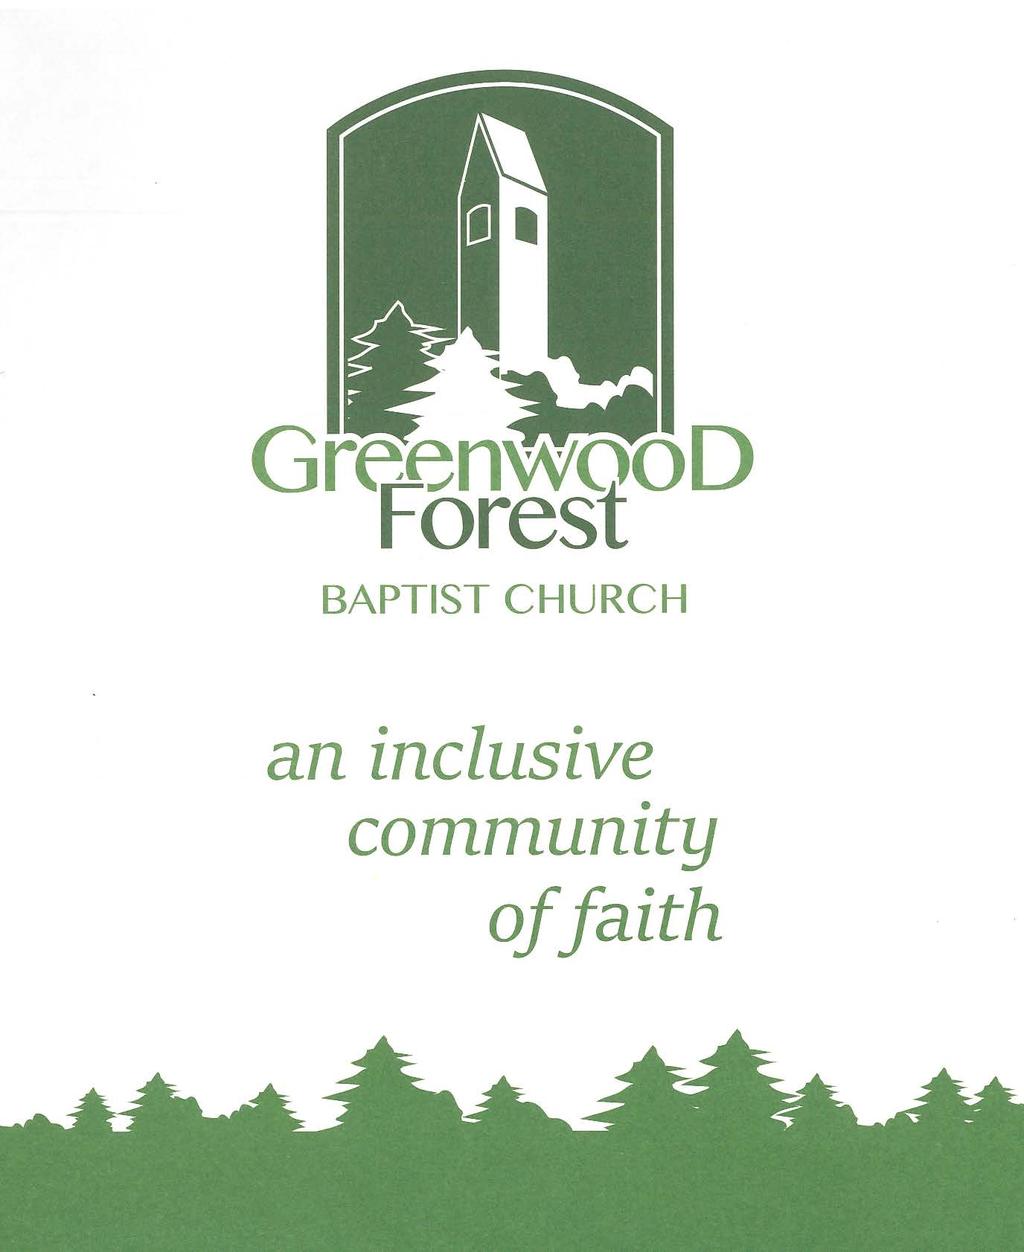 Chiming of the Hour GREENWOOD FOREST BAPTIST CHURCH The Worship of God The Fourth Sunday After Pentecost June 17, 2018 Gathering Hymn 307 (v.